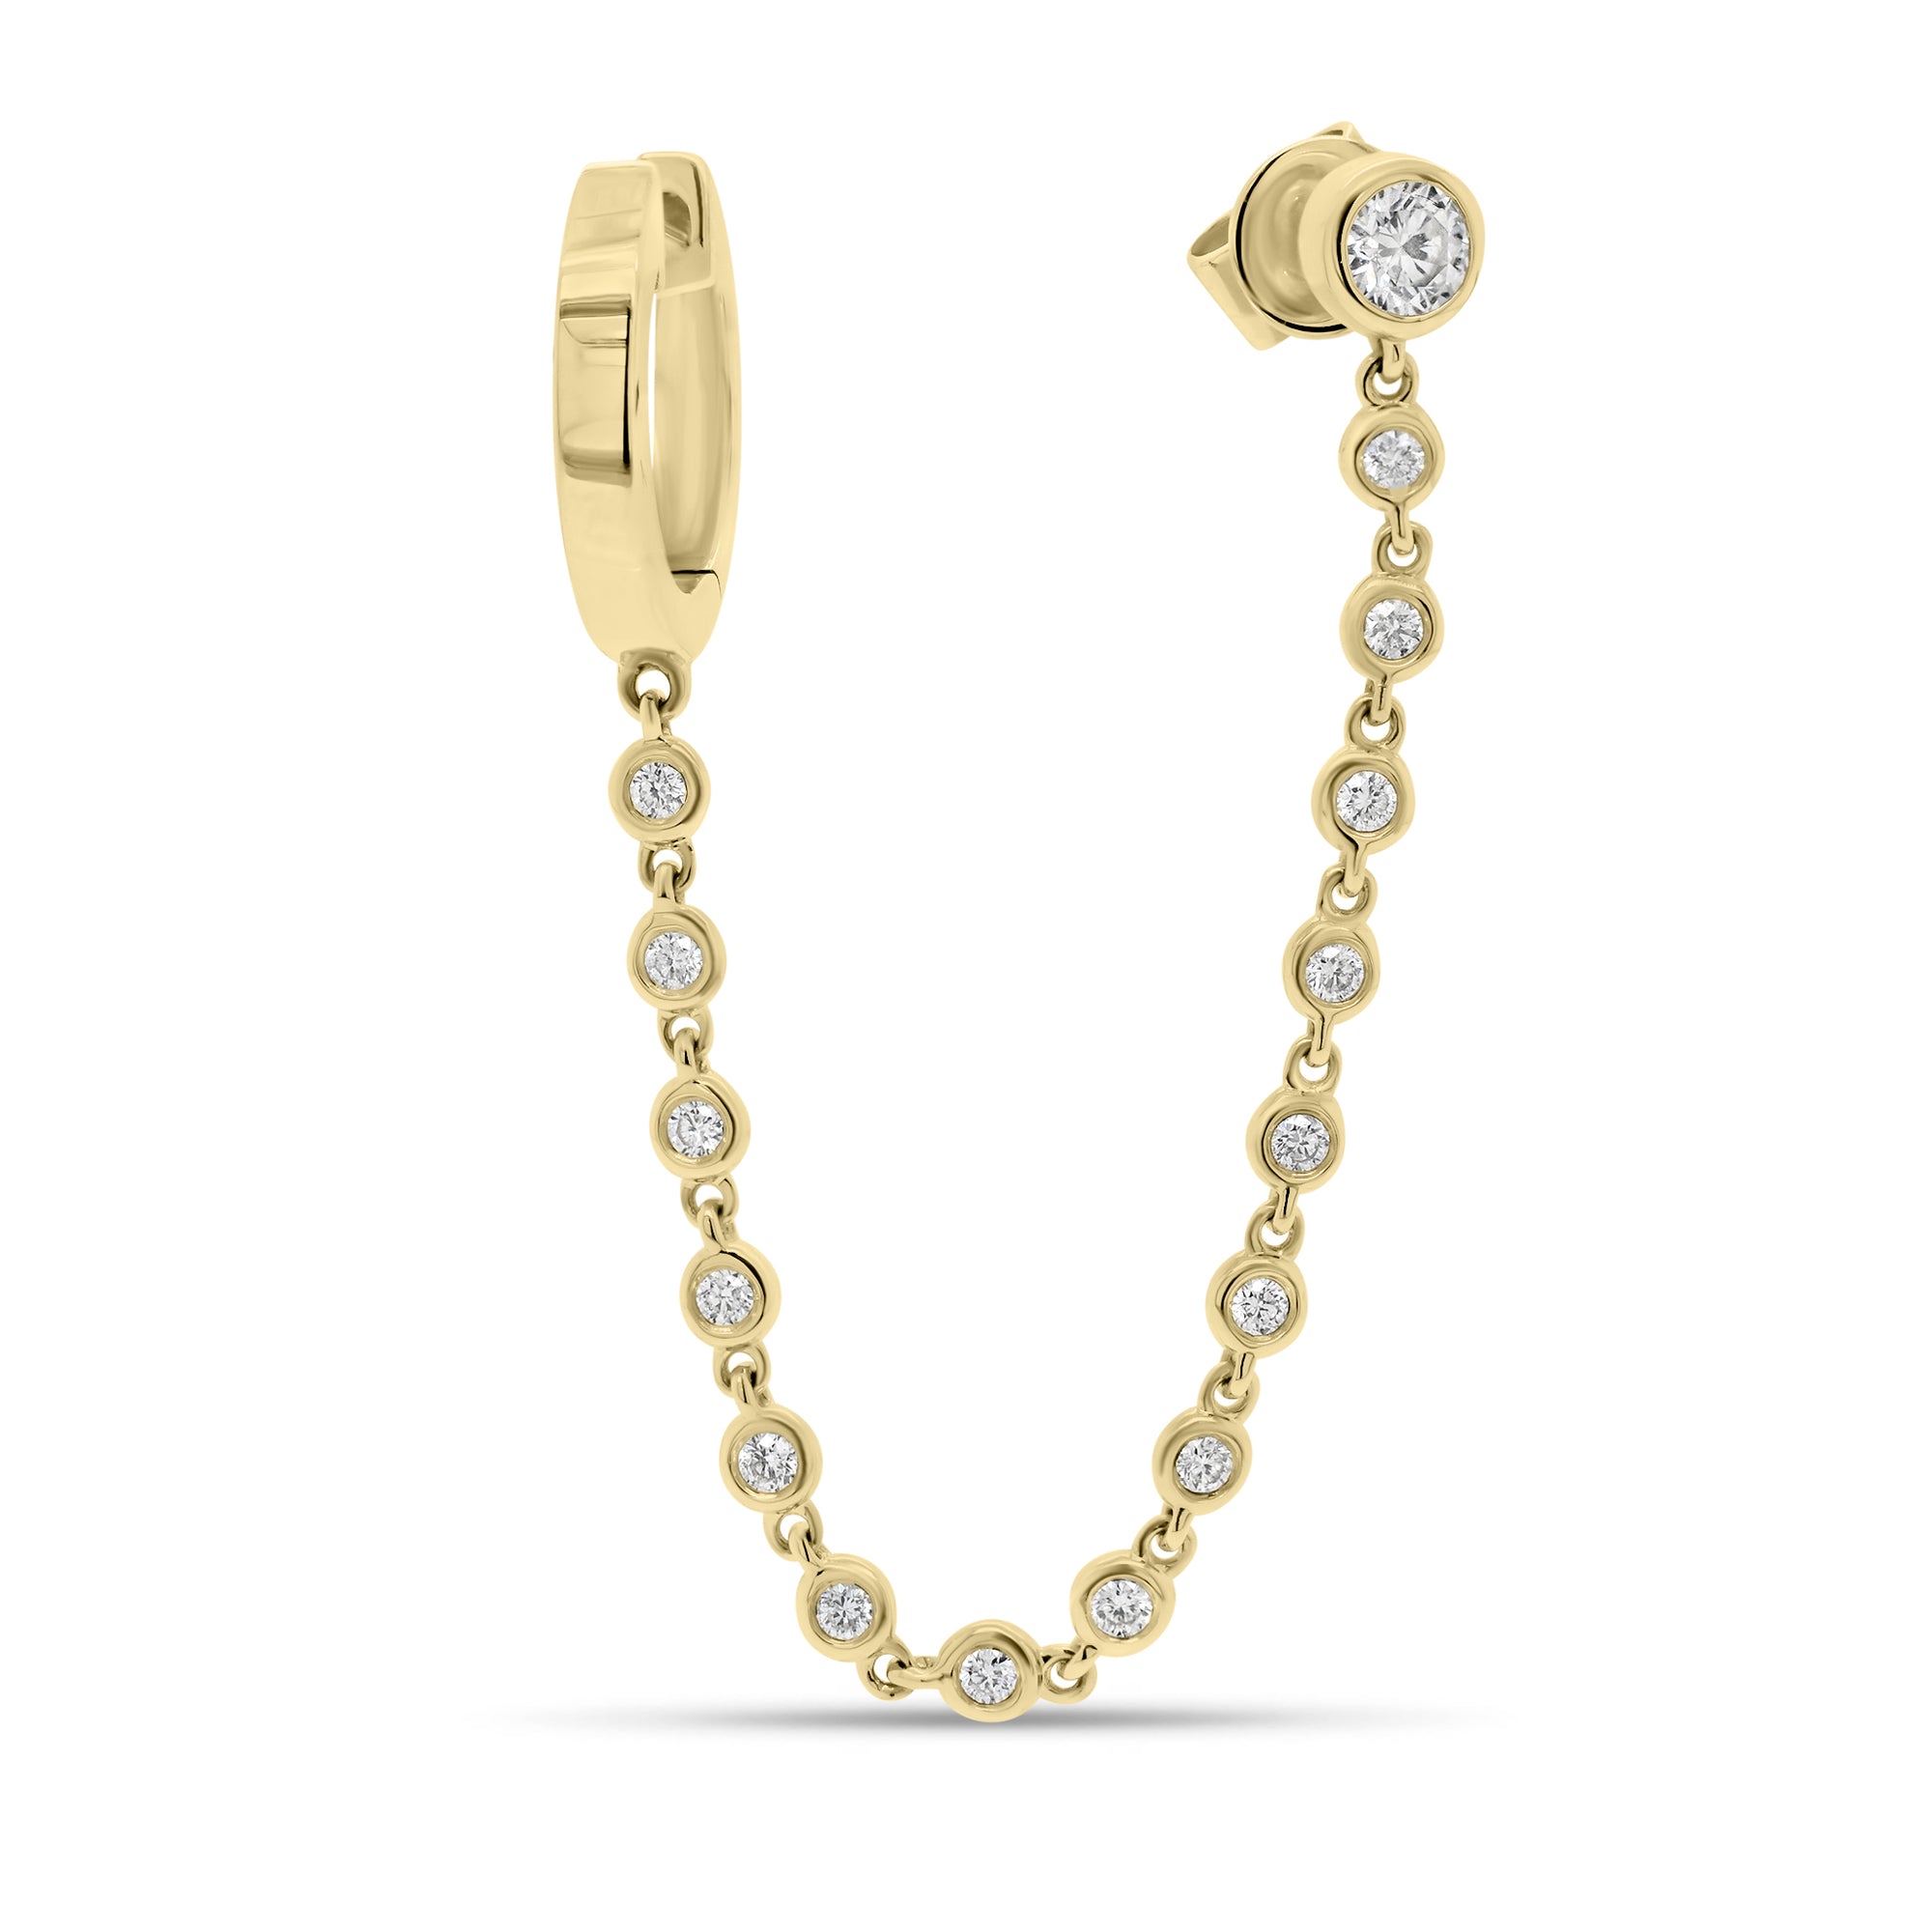 Gold ear cuff with bezel-set diamond chain - 14K gold weighing 2.24 grams  - 16 round diamonds totaling 0.16 carats